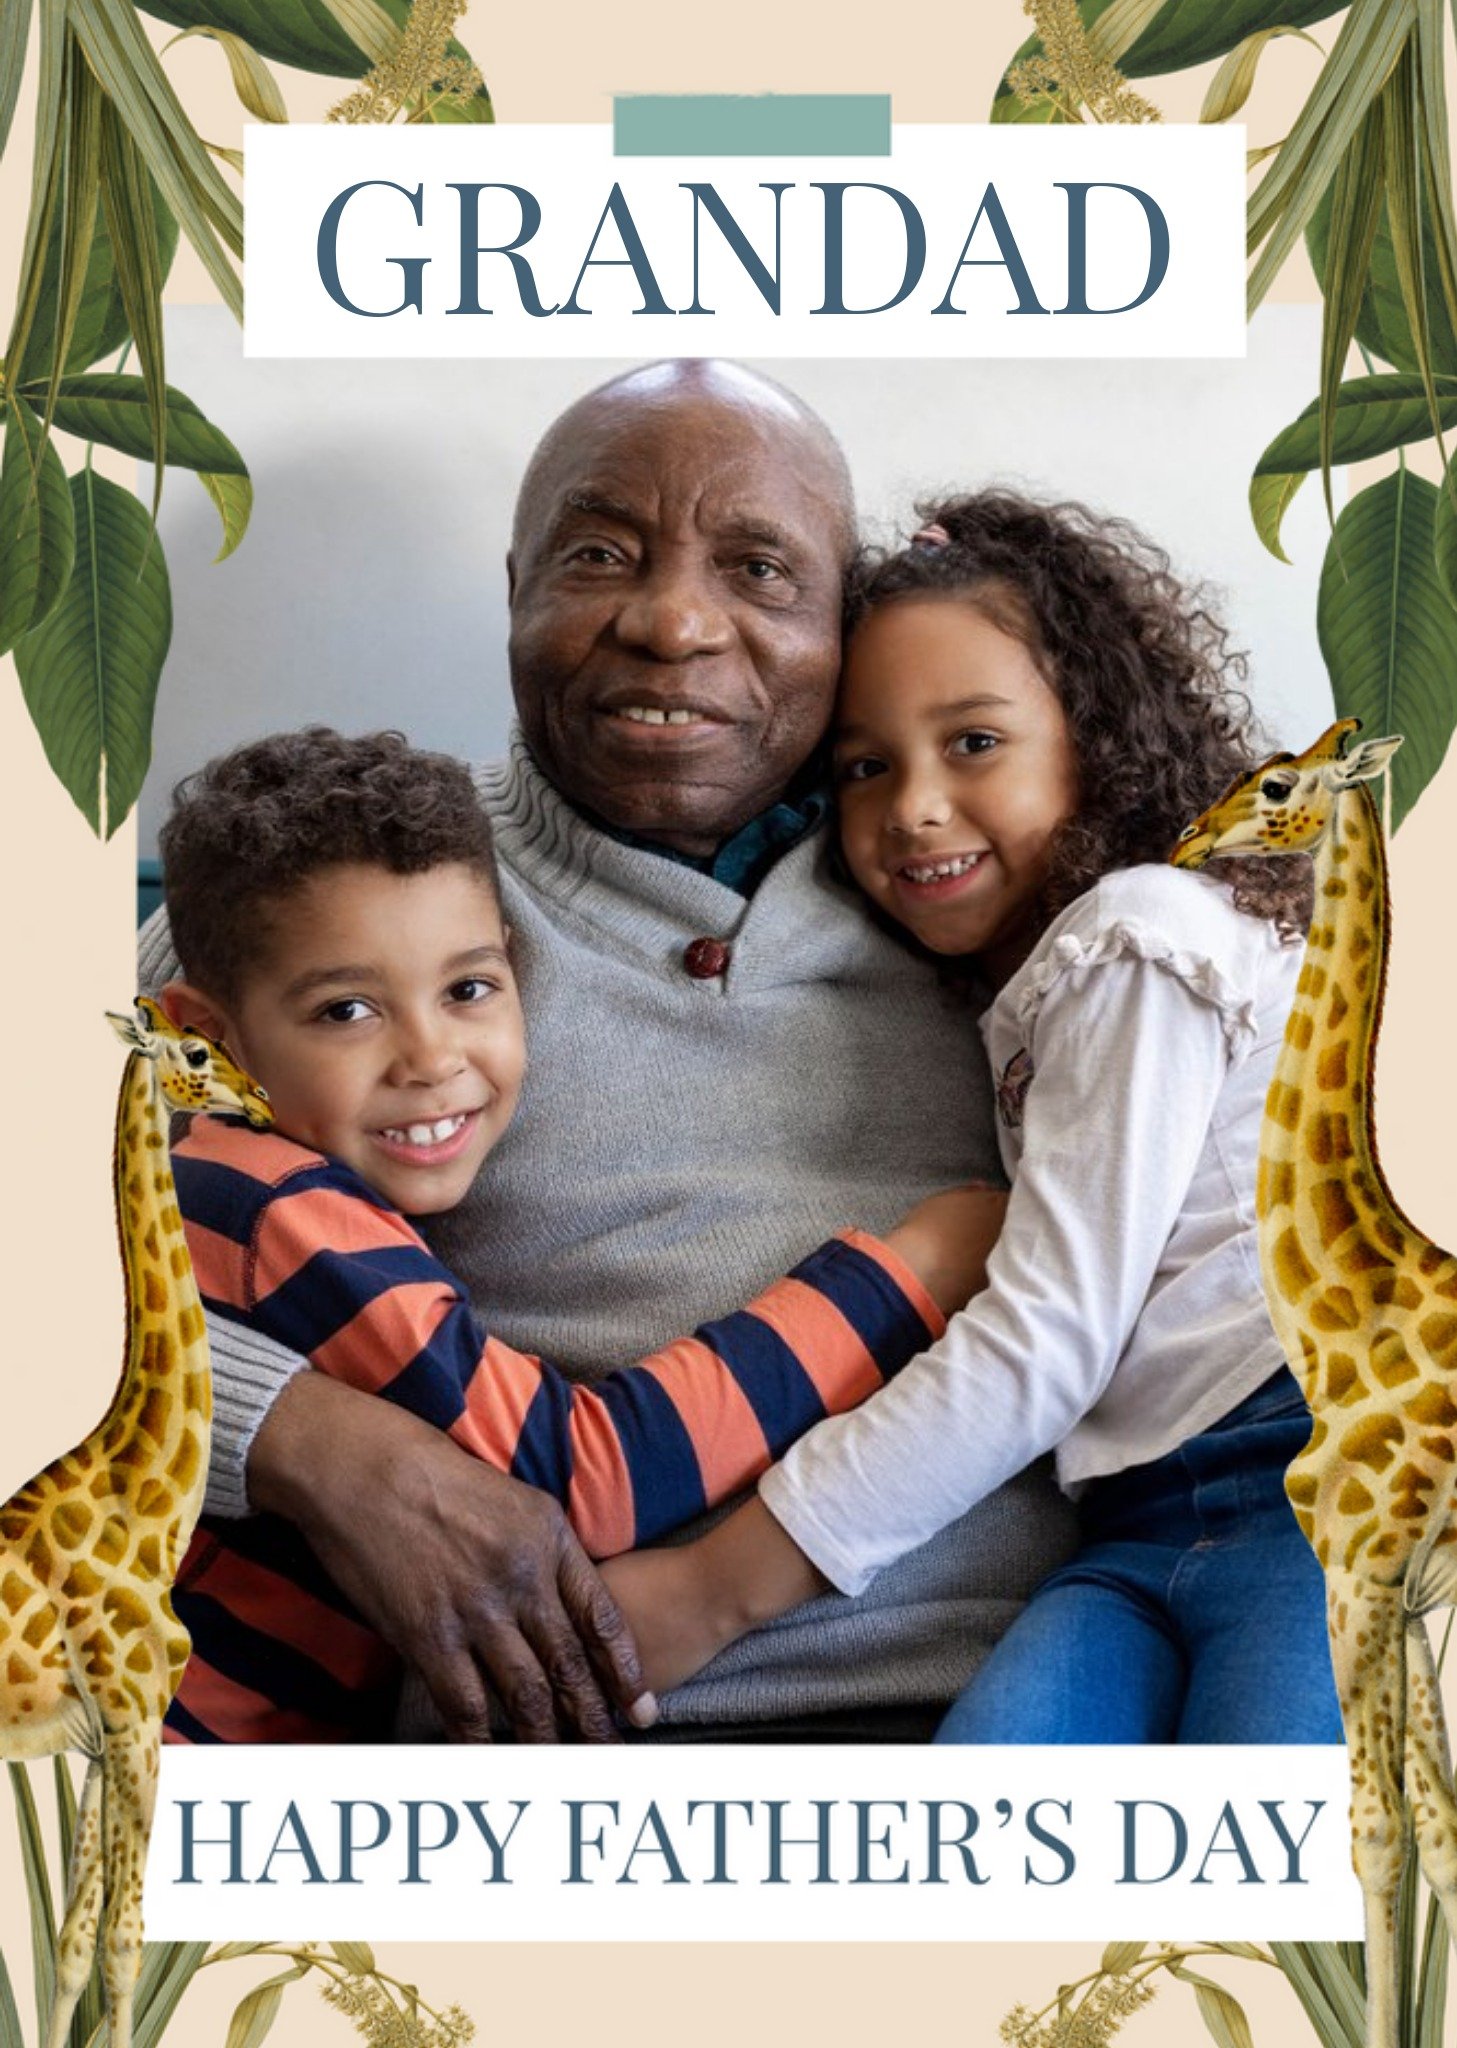 The Natural History Museum Natural History Museum Giraffes Photo Upload Father's Day Card For Granda